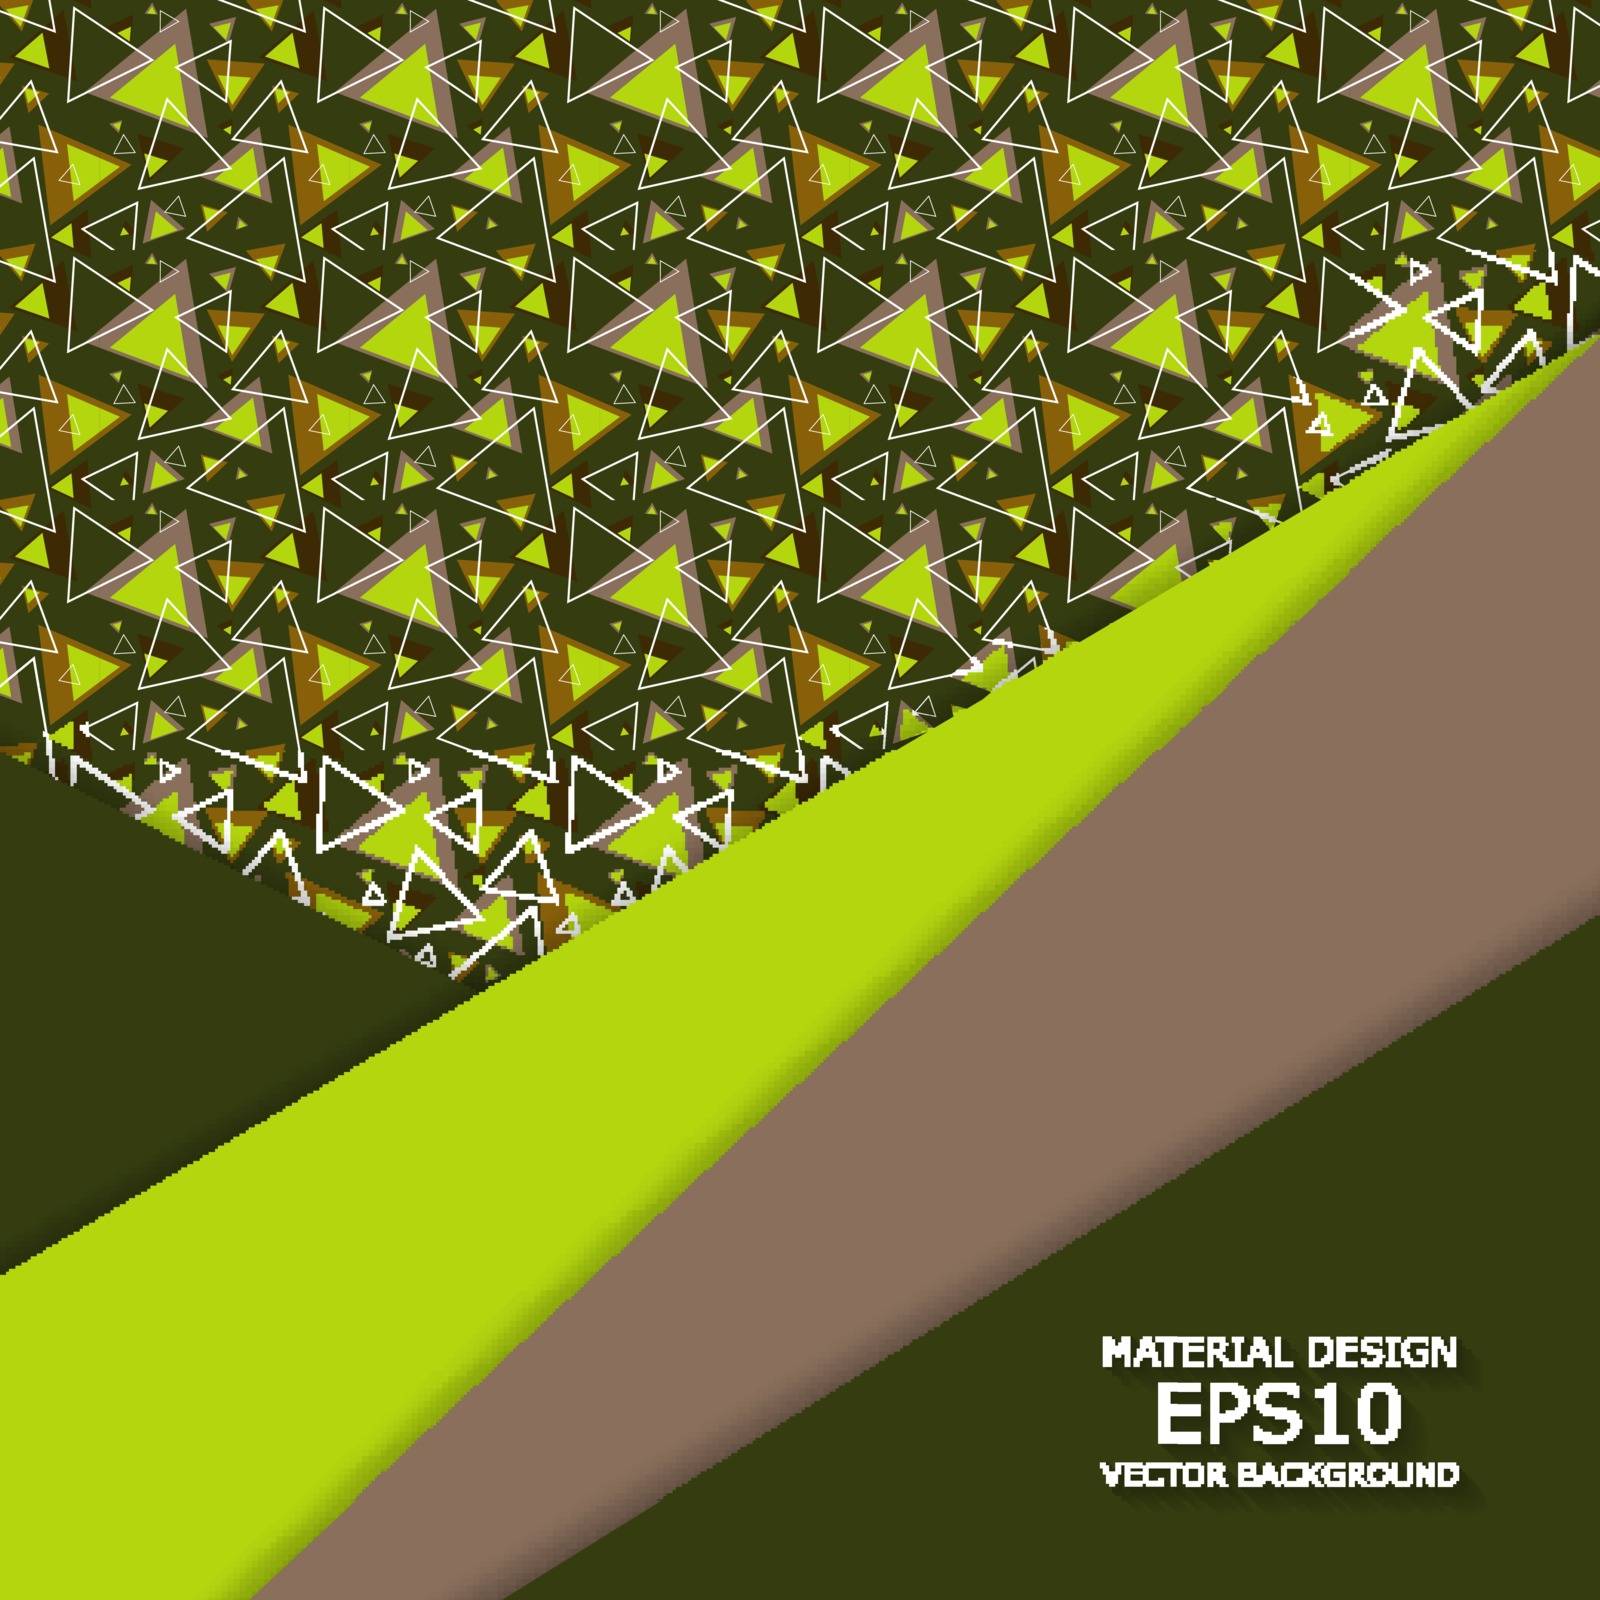 Unusual modern material design vector background over seamless pattern. Geometric shapes. Eps10 vector illustration